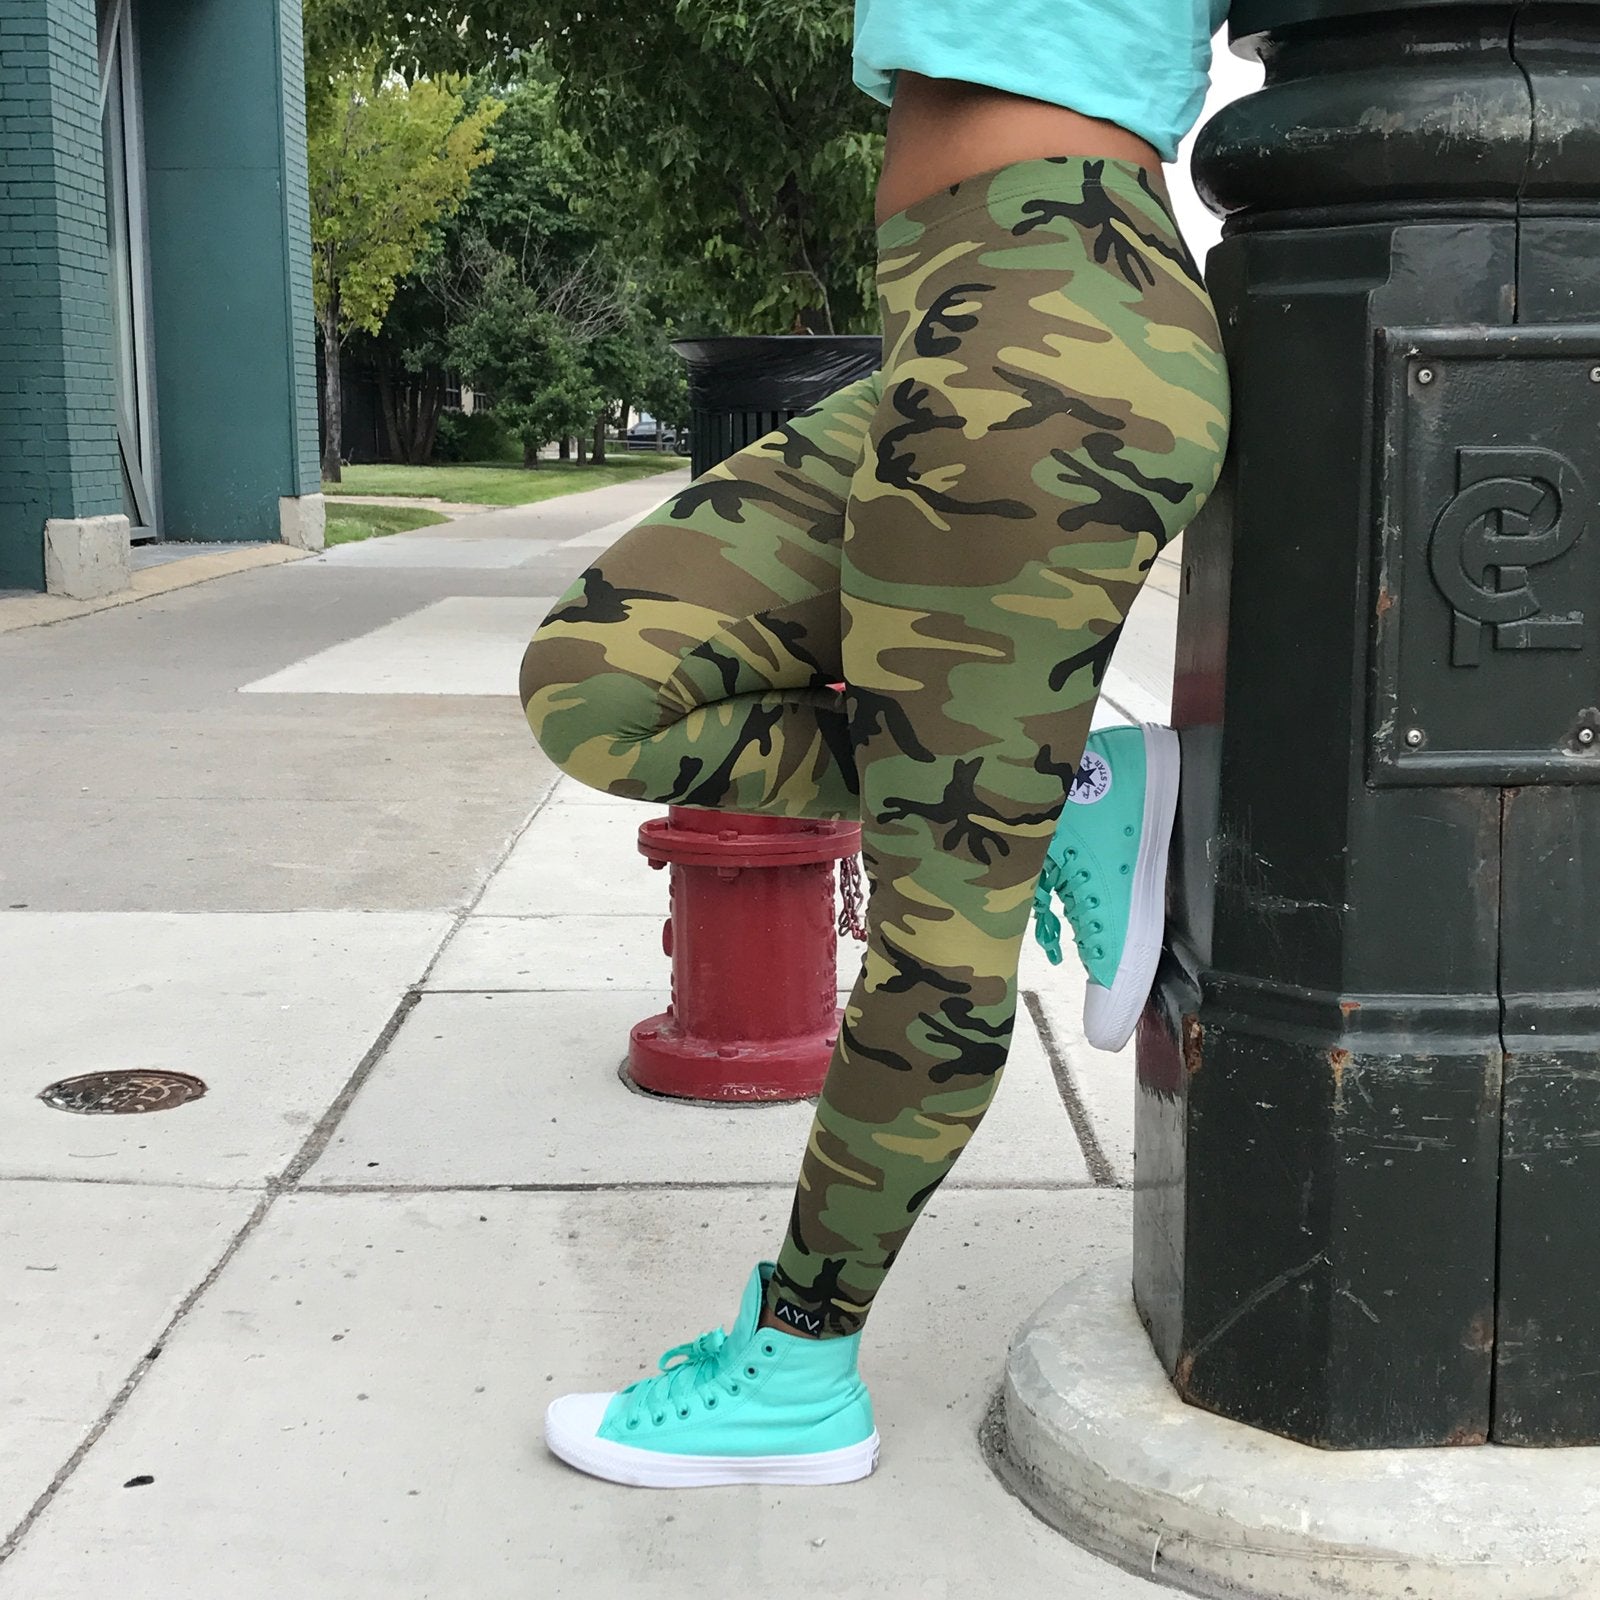 Green Camo Leggings for Women Army / Military Camouflage Pattern